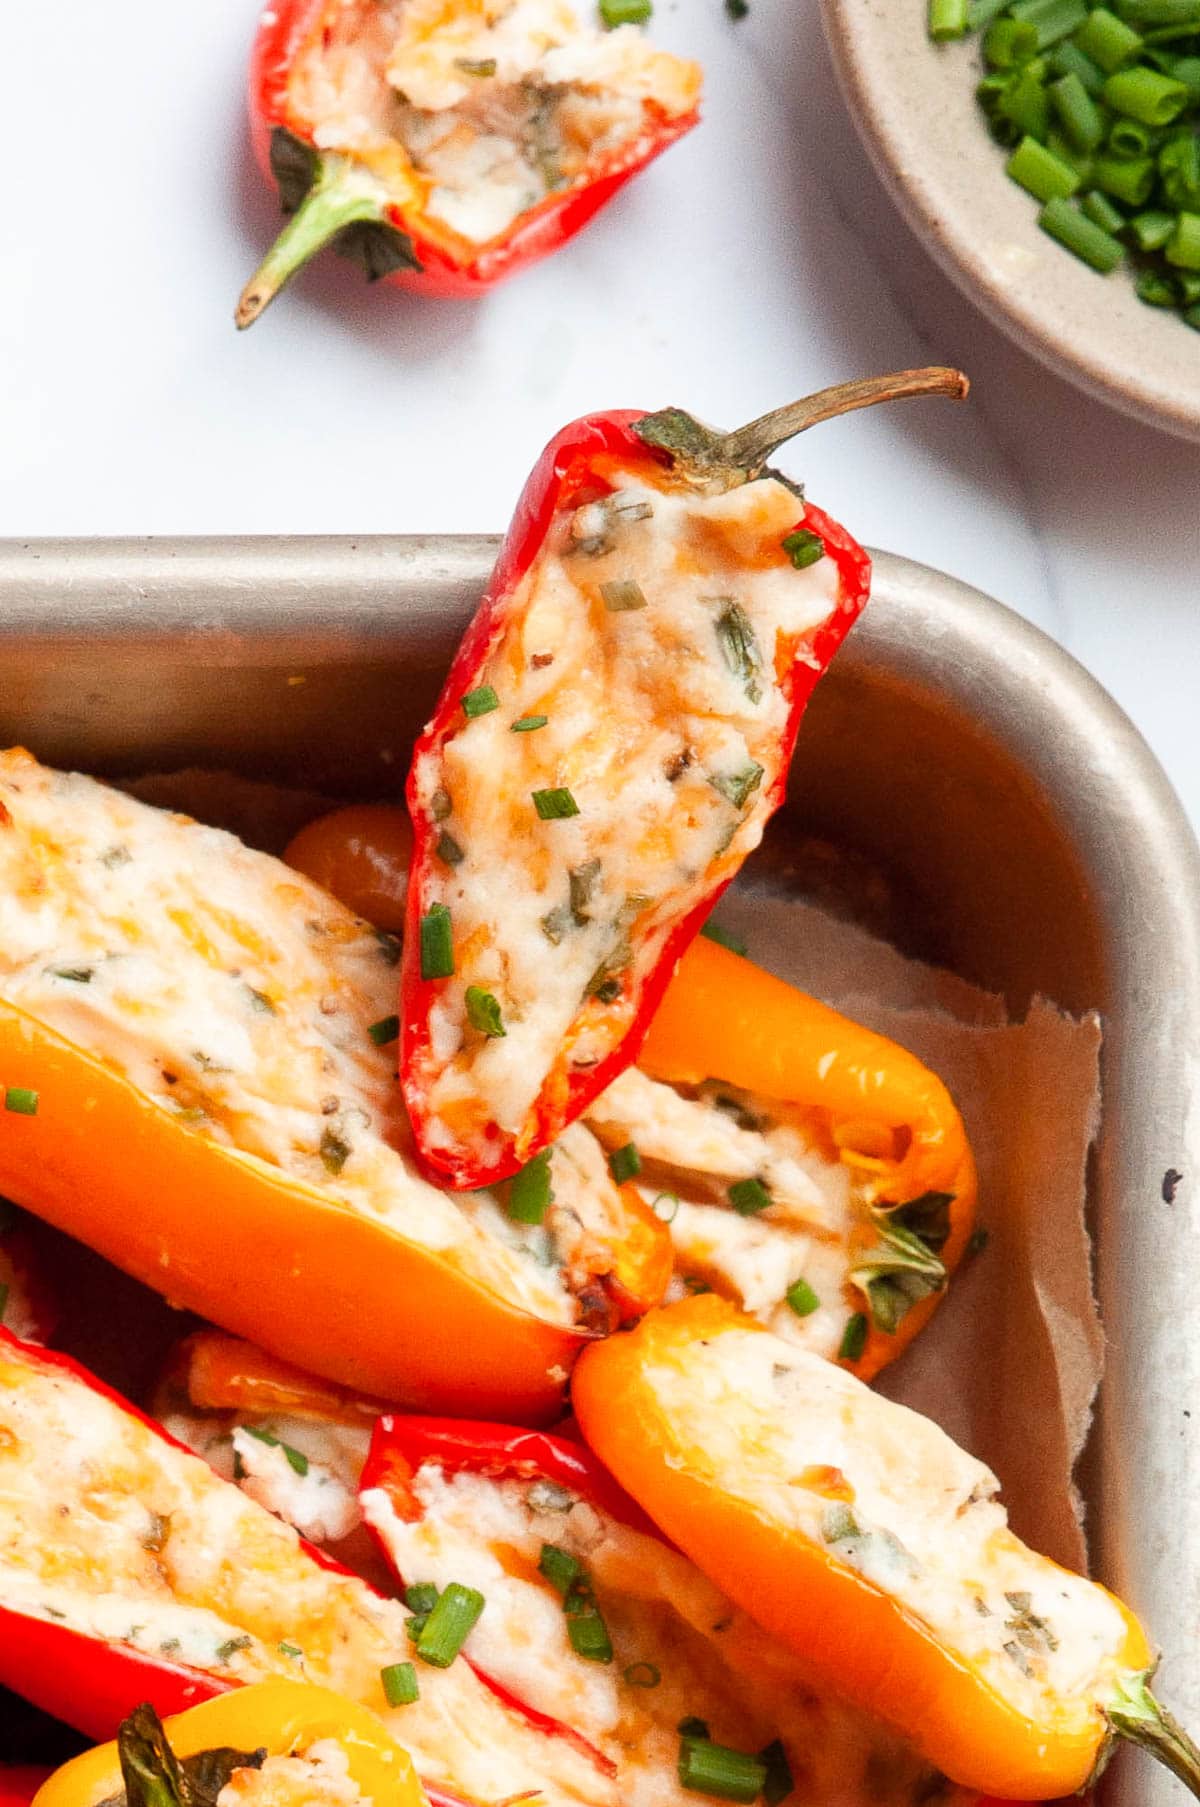 One stuffed mini pepper on a tray with other mini appetizers.